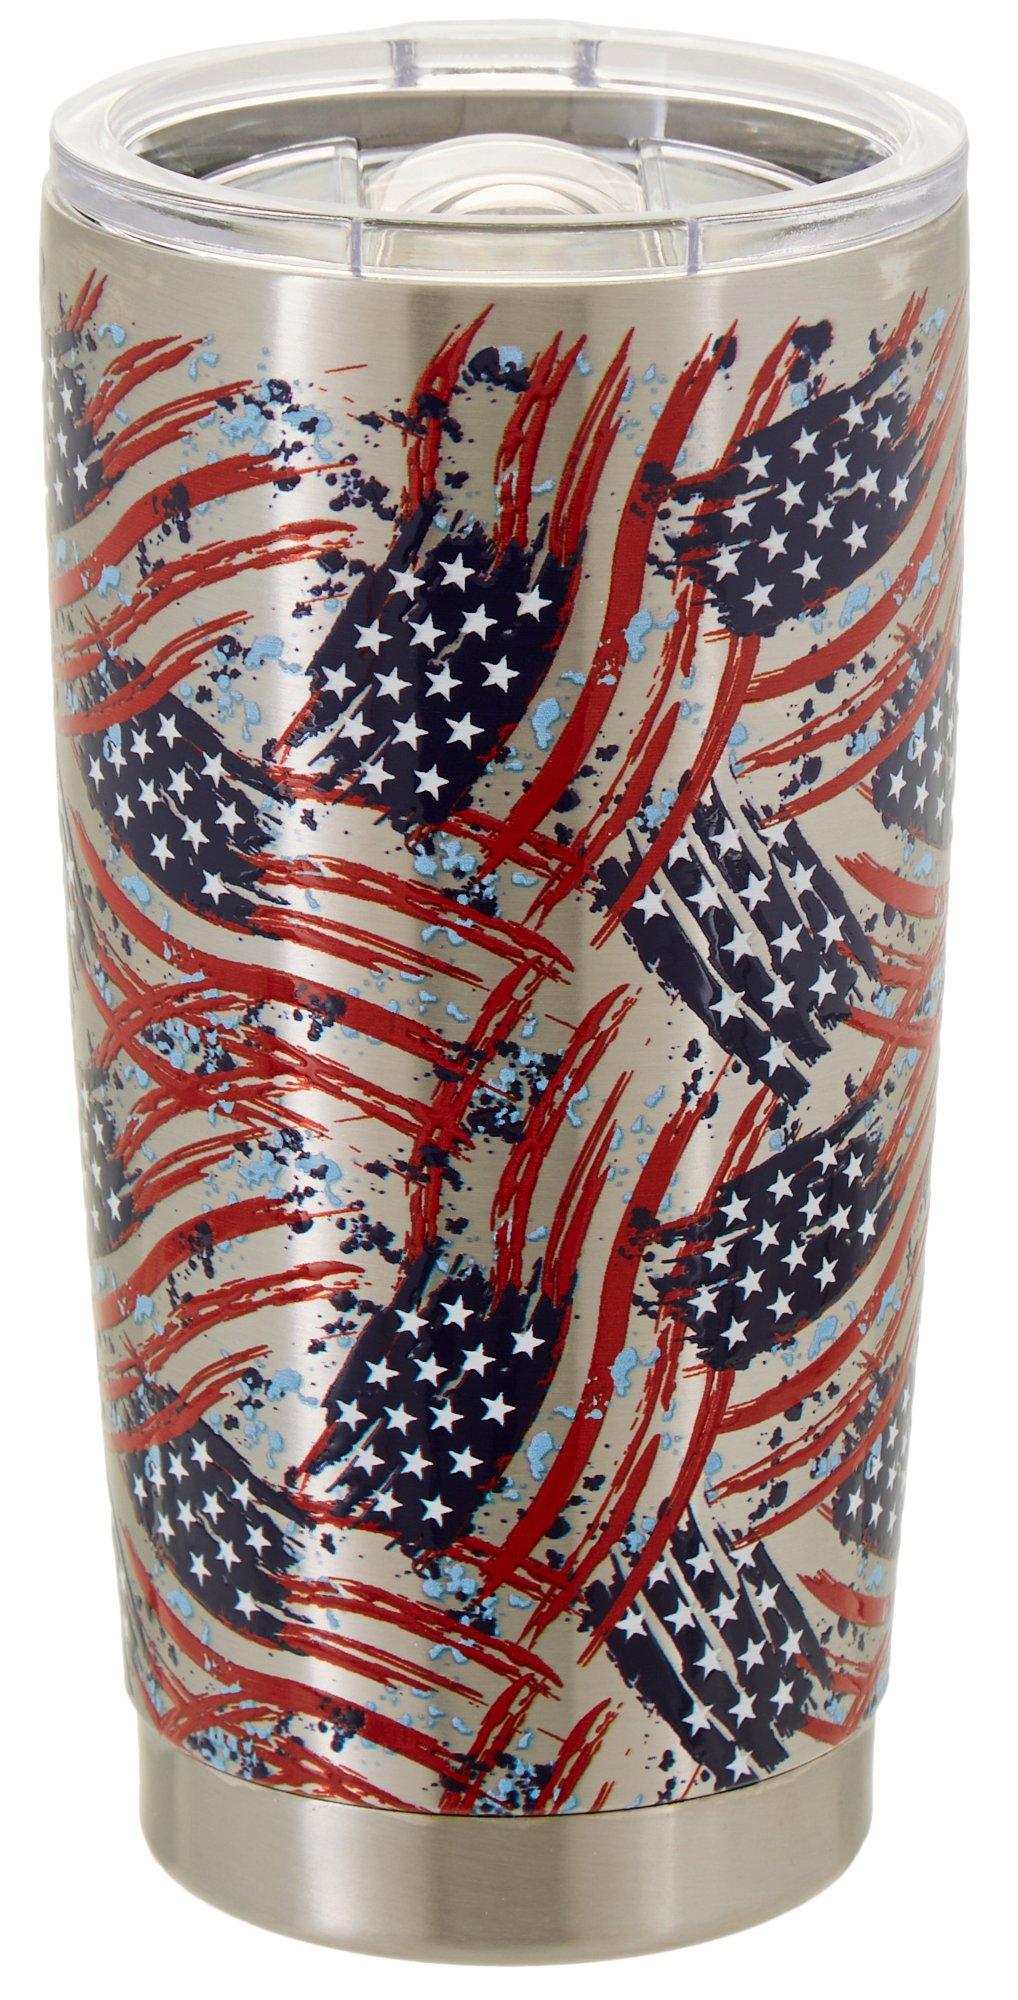 20 oz. Stainless Steel Painted Flag Tumbler